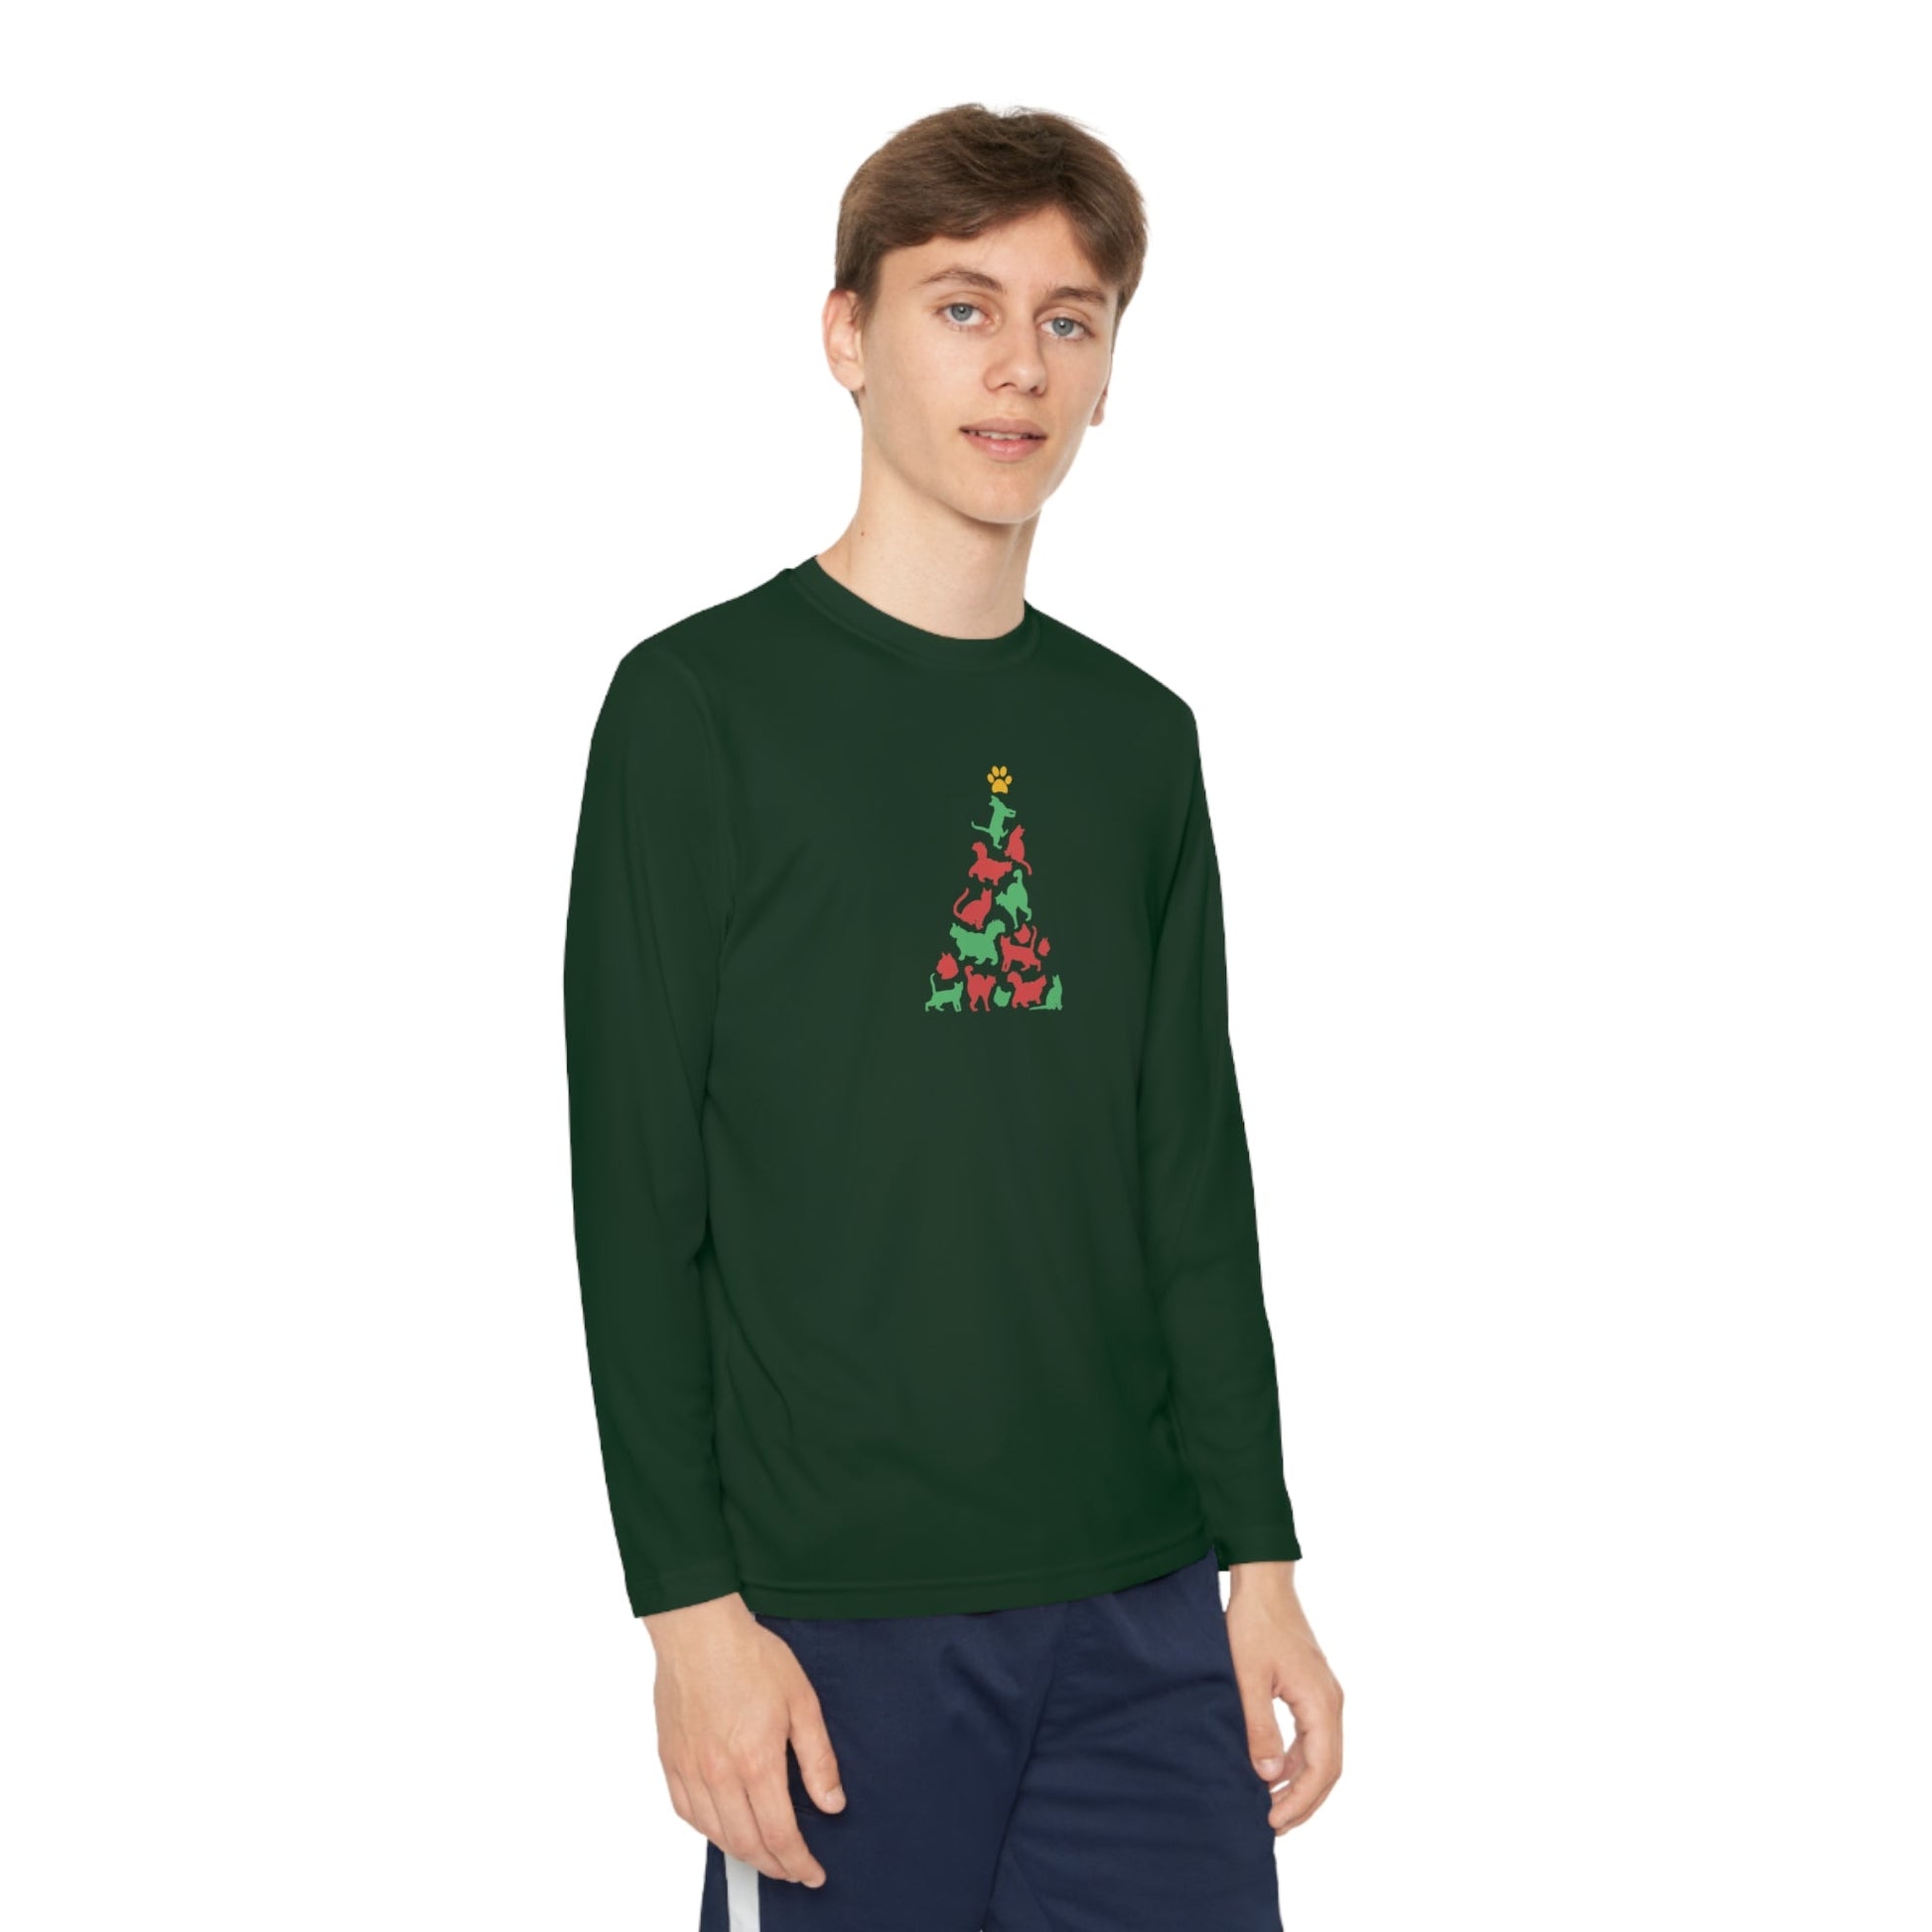 Cat Christmas Tree Youth Long Sleeve Competitor Tee - Kids clothes - Epileptic Al’s Shop